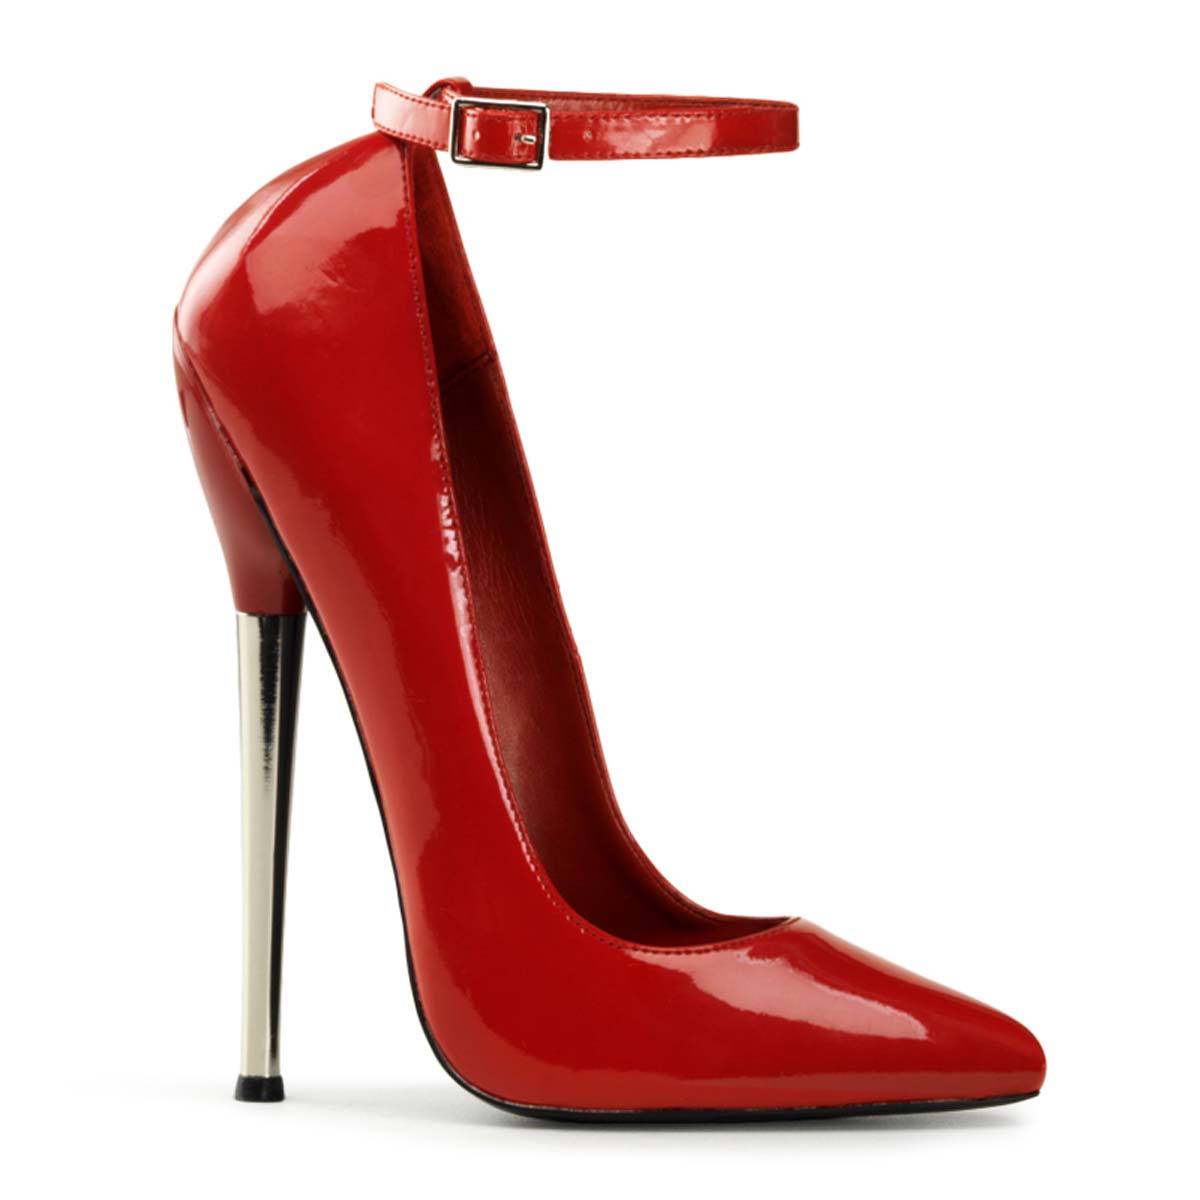 Pleaser Devious Dagger-12 - Red Patent in Sexy Heels & Platforms - $73.95